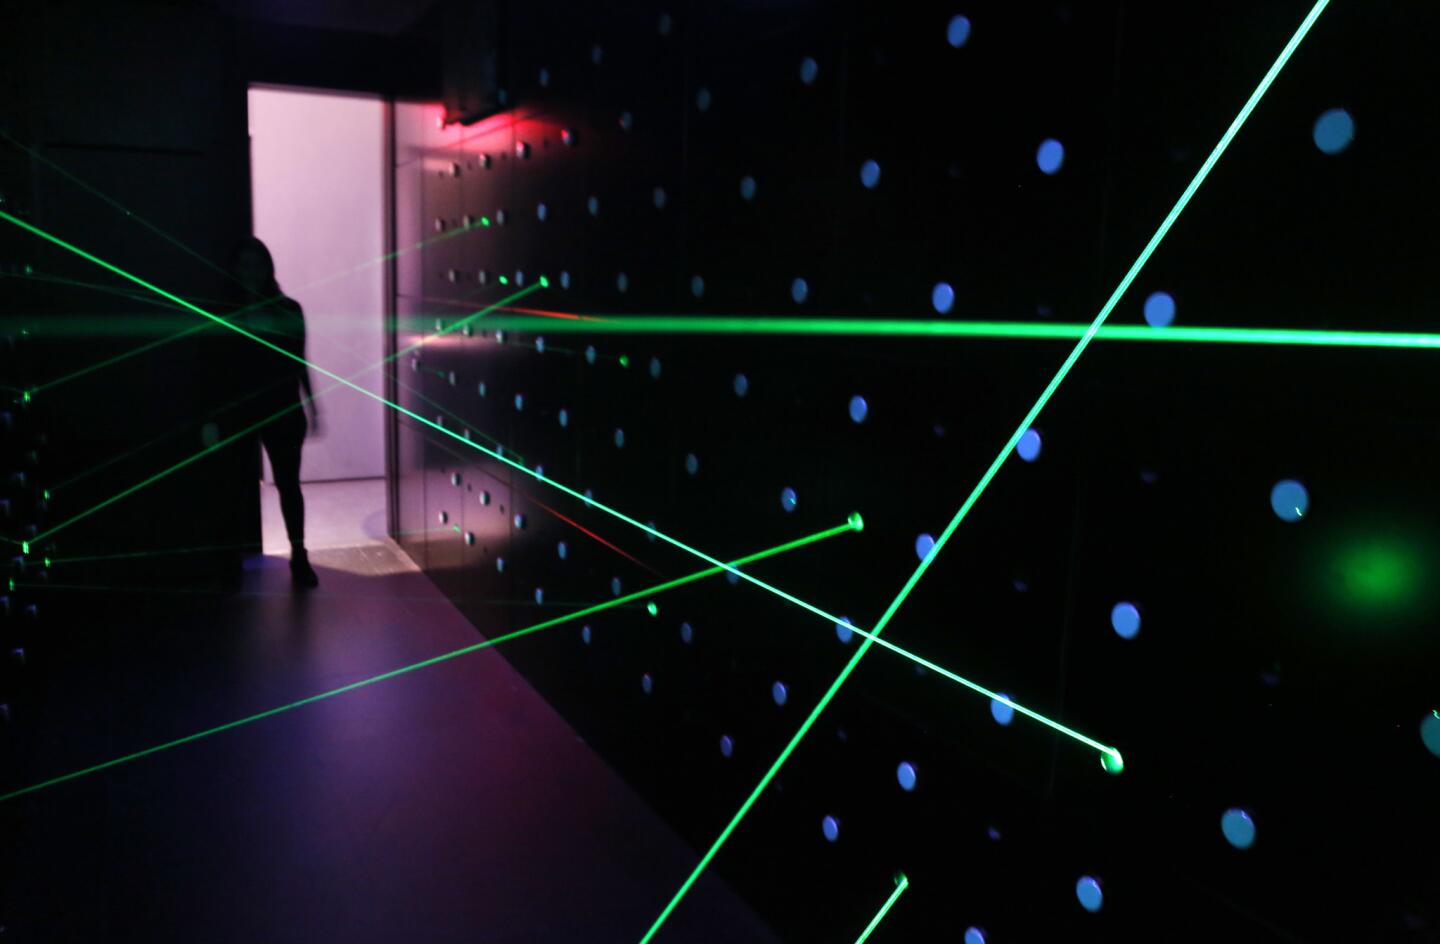 Lasers fill a room that challenges visitors to pass through without touching them at SPYSCAPE in New York.